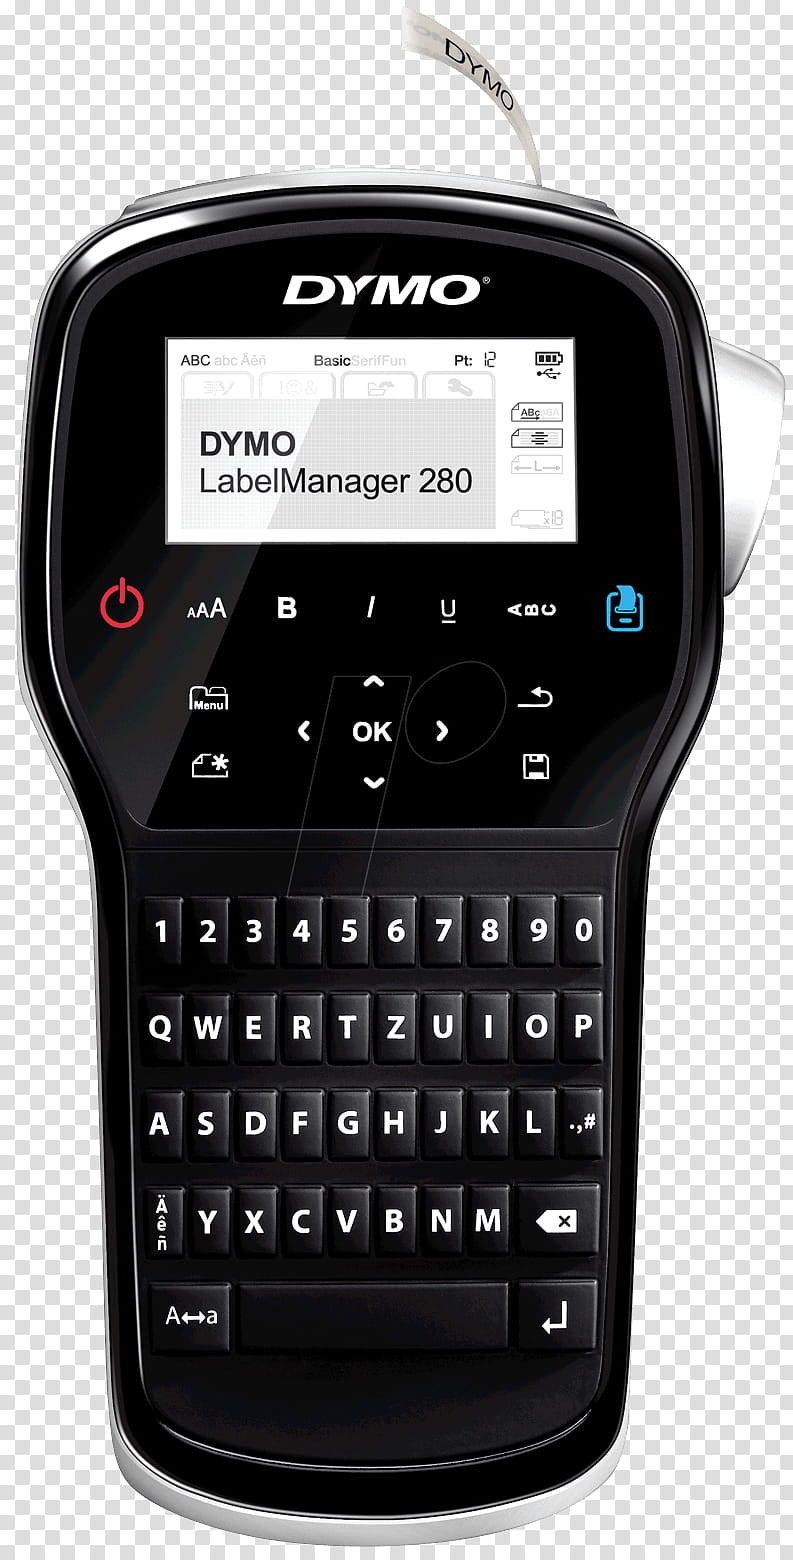 Dymo Bvba Technology, Label Printer, Dymo Labelmanager 280, Dymo Labelmanager 160 Monochrome Label Maker, Dymo Labelwriter 450, Printing, Office Supplies, Packaging And Labeling transparent background PNG clipart